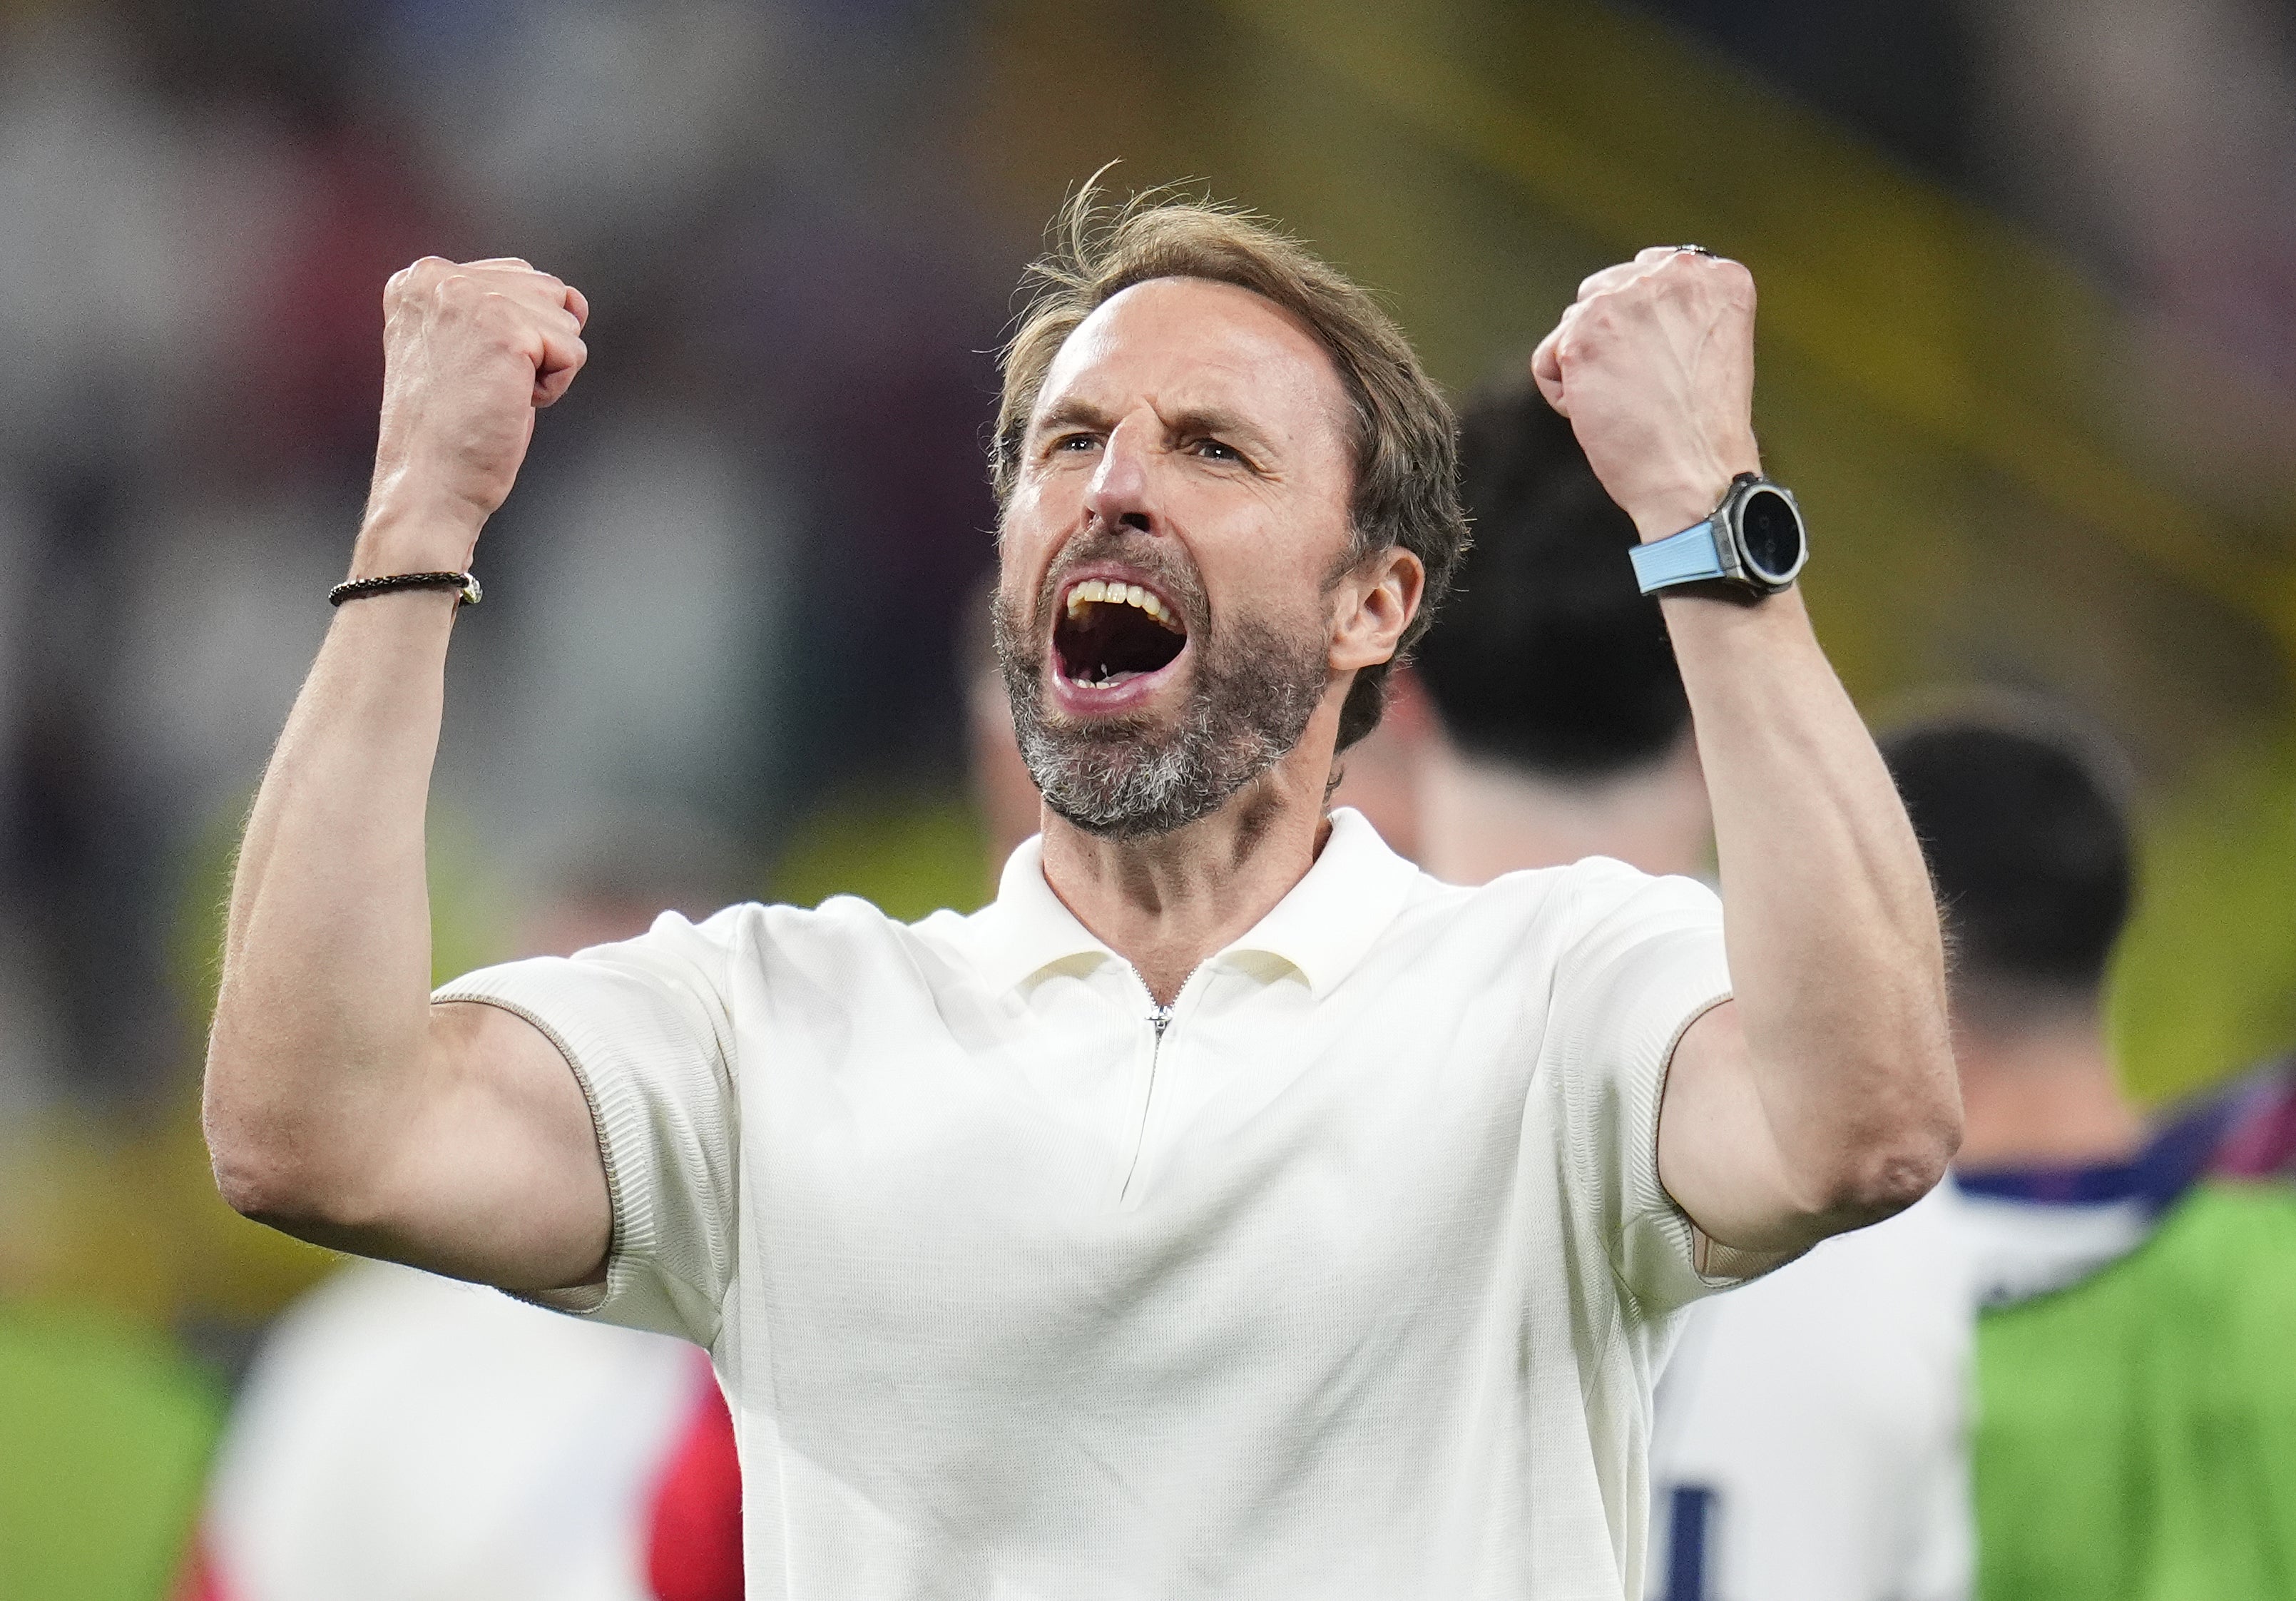 The England boss celebrated with gusto after the final whistle (Nick Potts/PA)